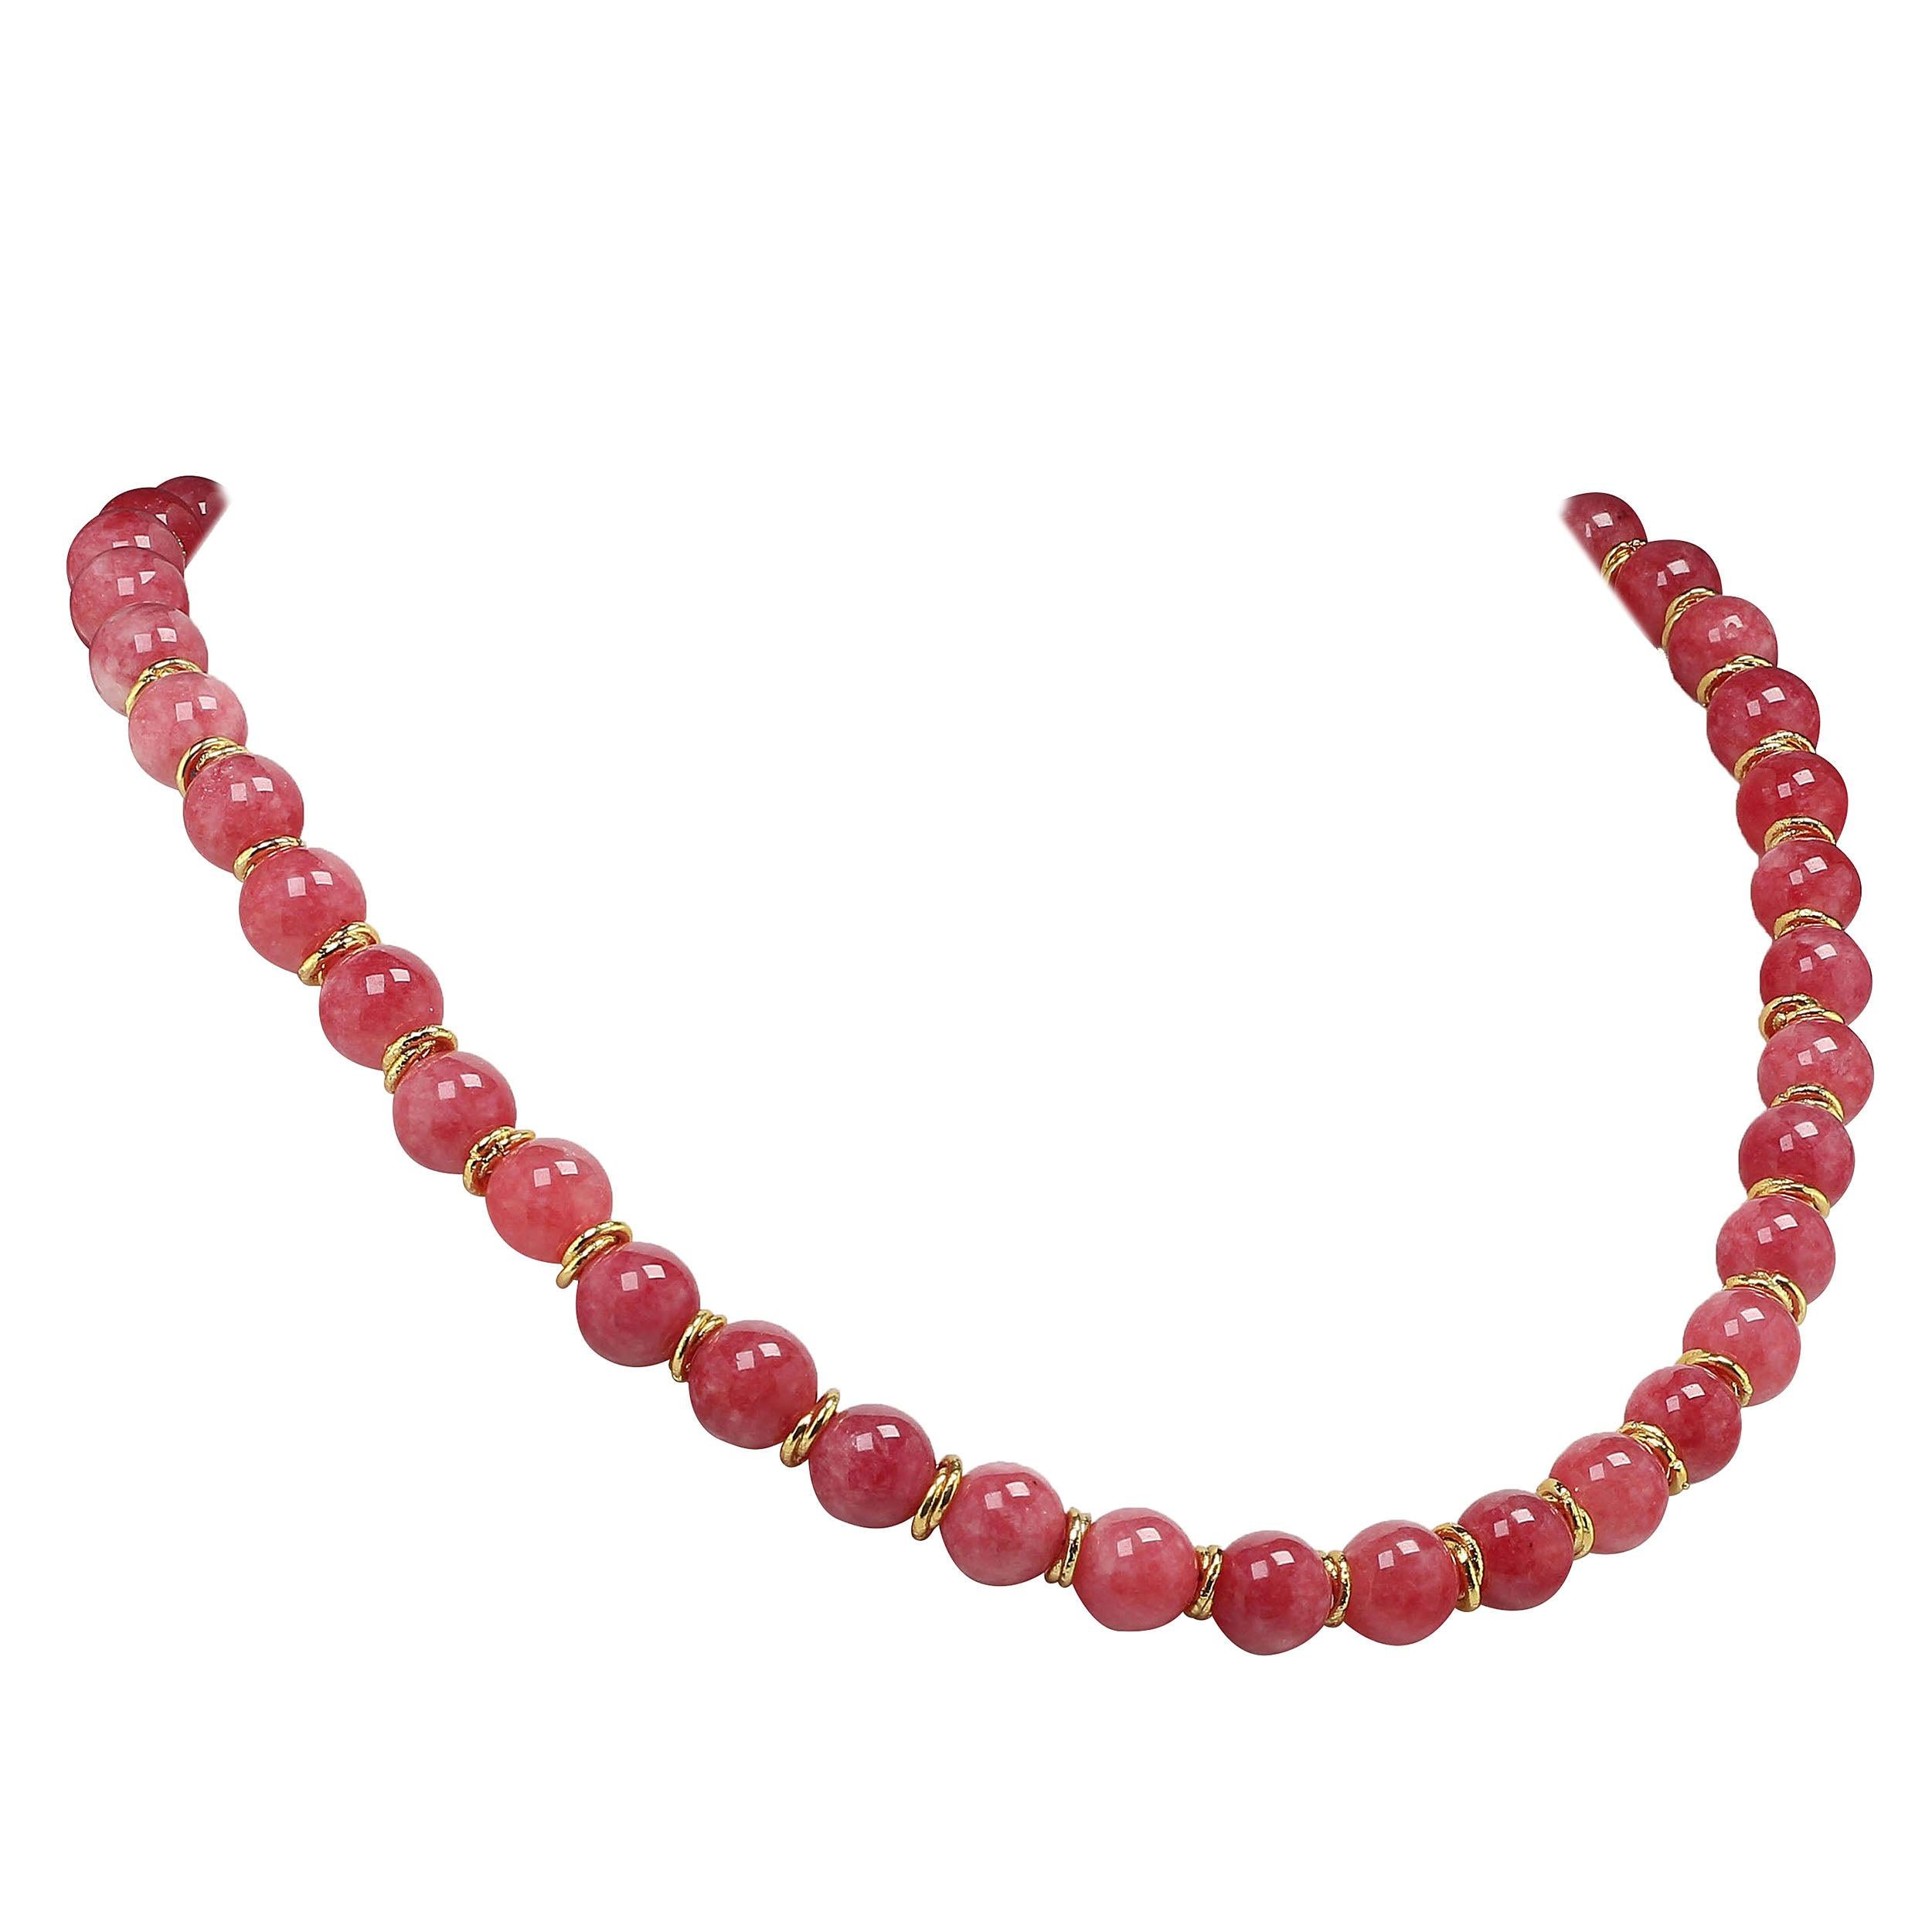 Rhodochrosite Tone Necklace with Goldy Accents